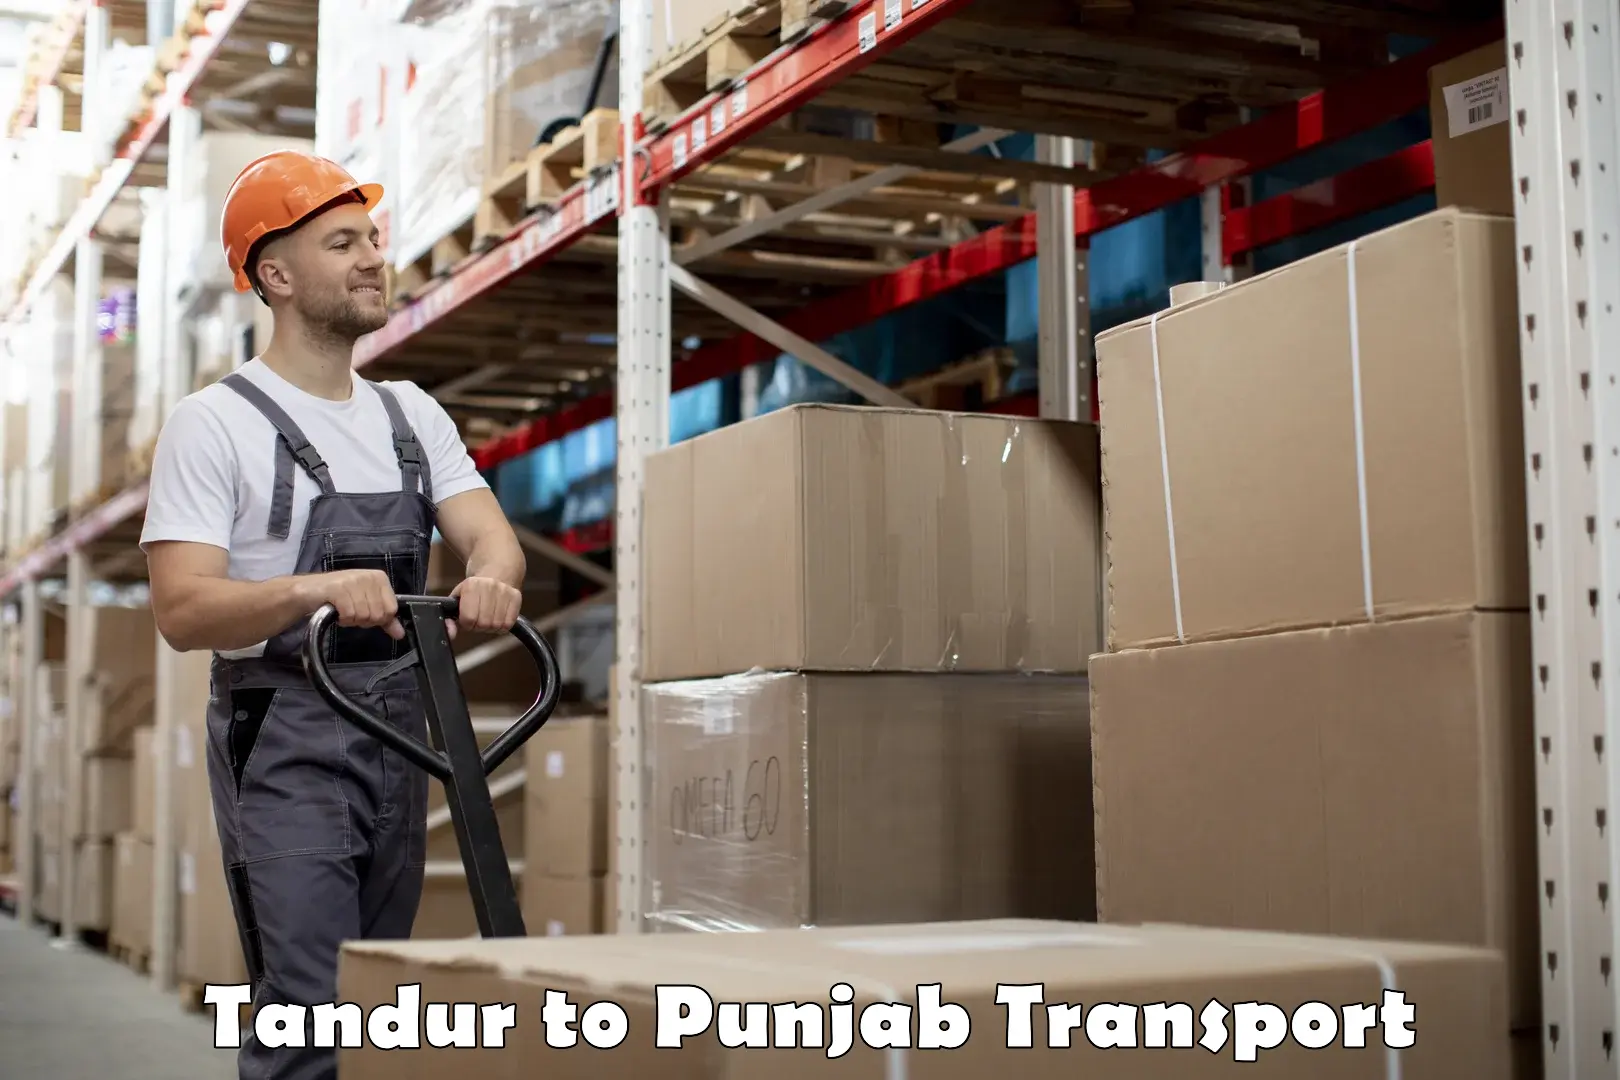 Transport bike from one state to another Tandur to Goindwal Sahib